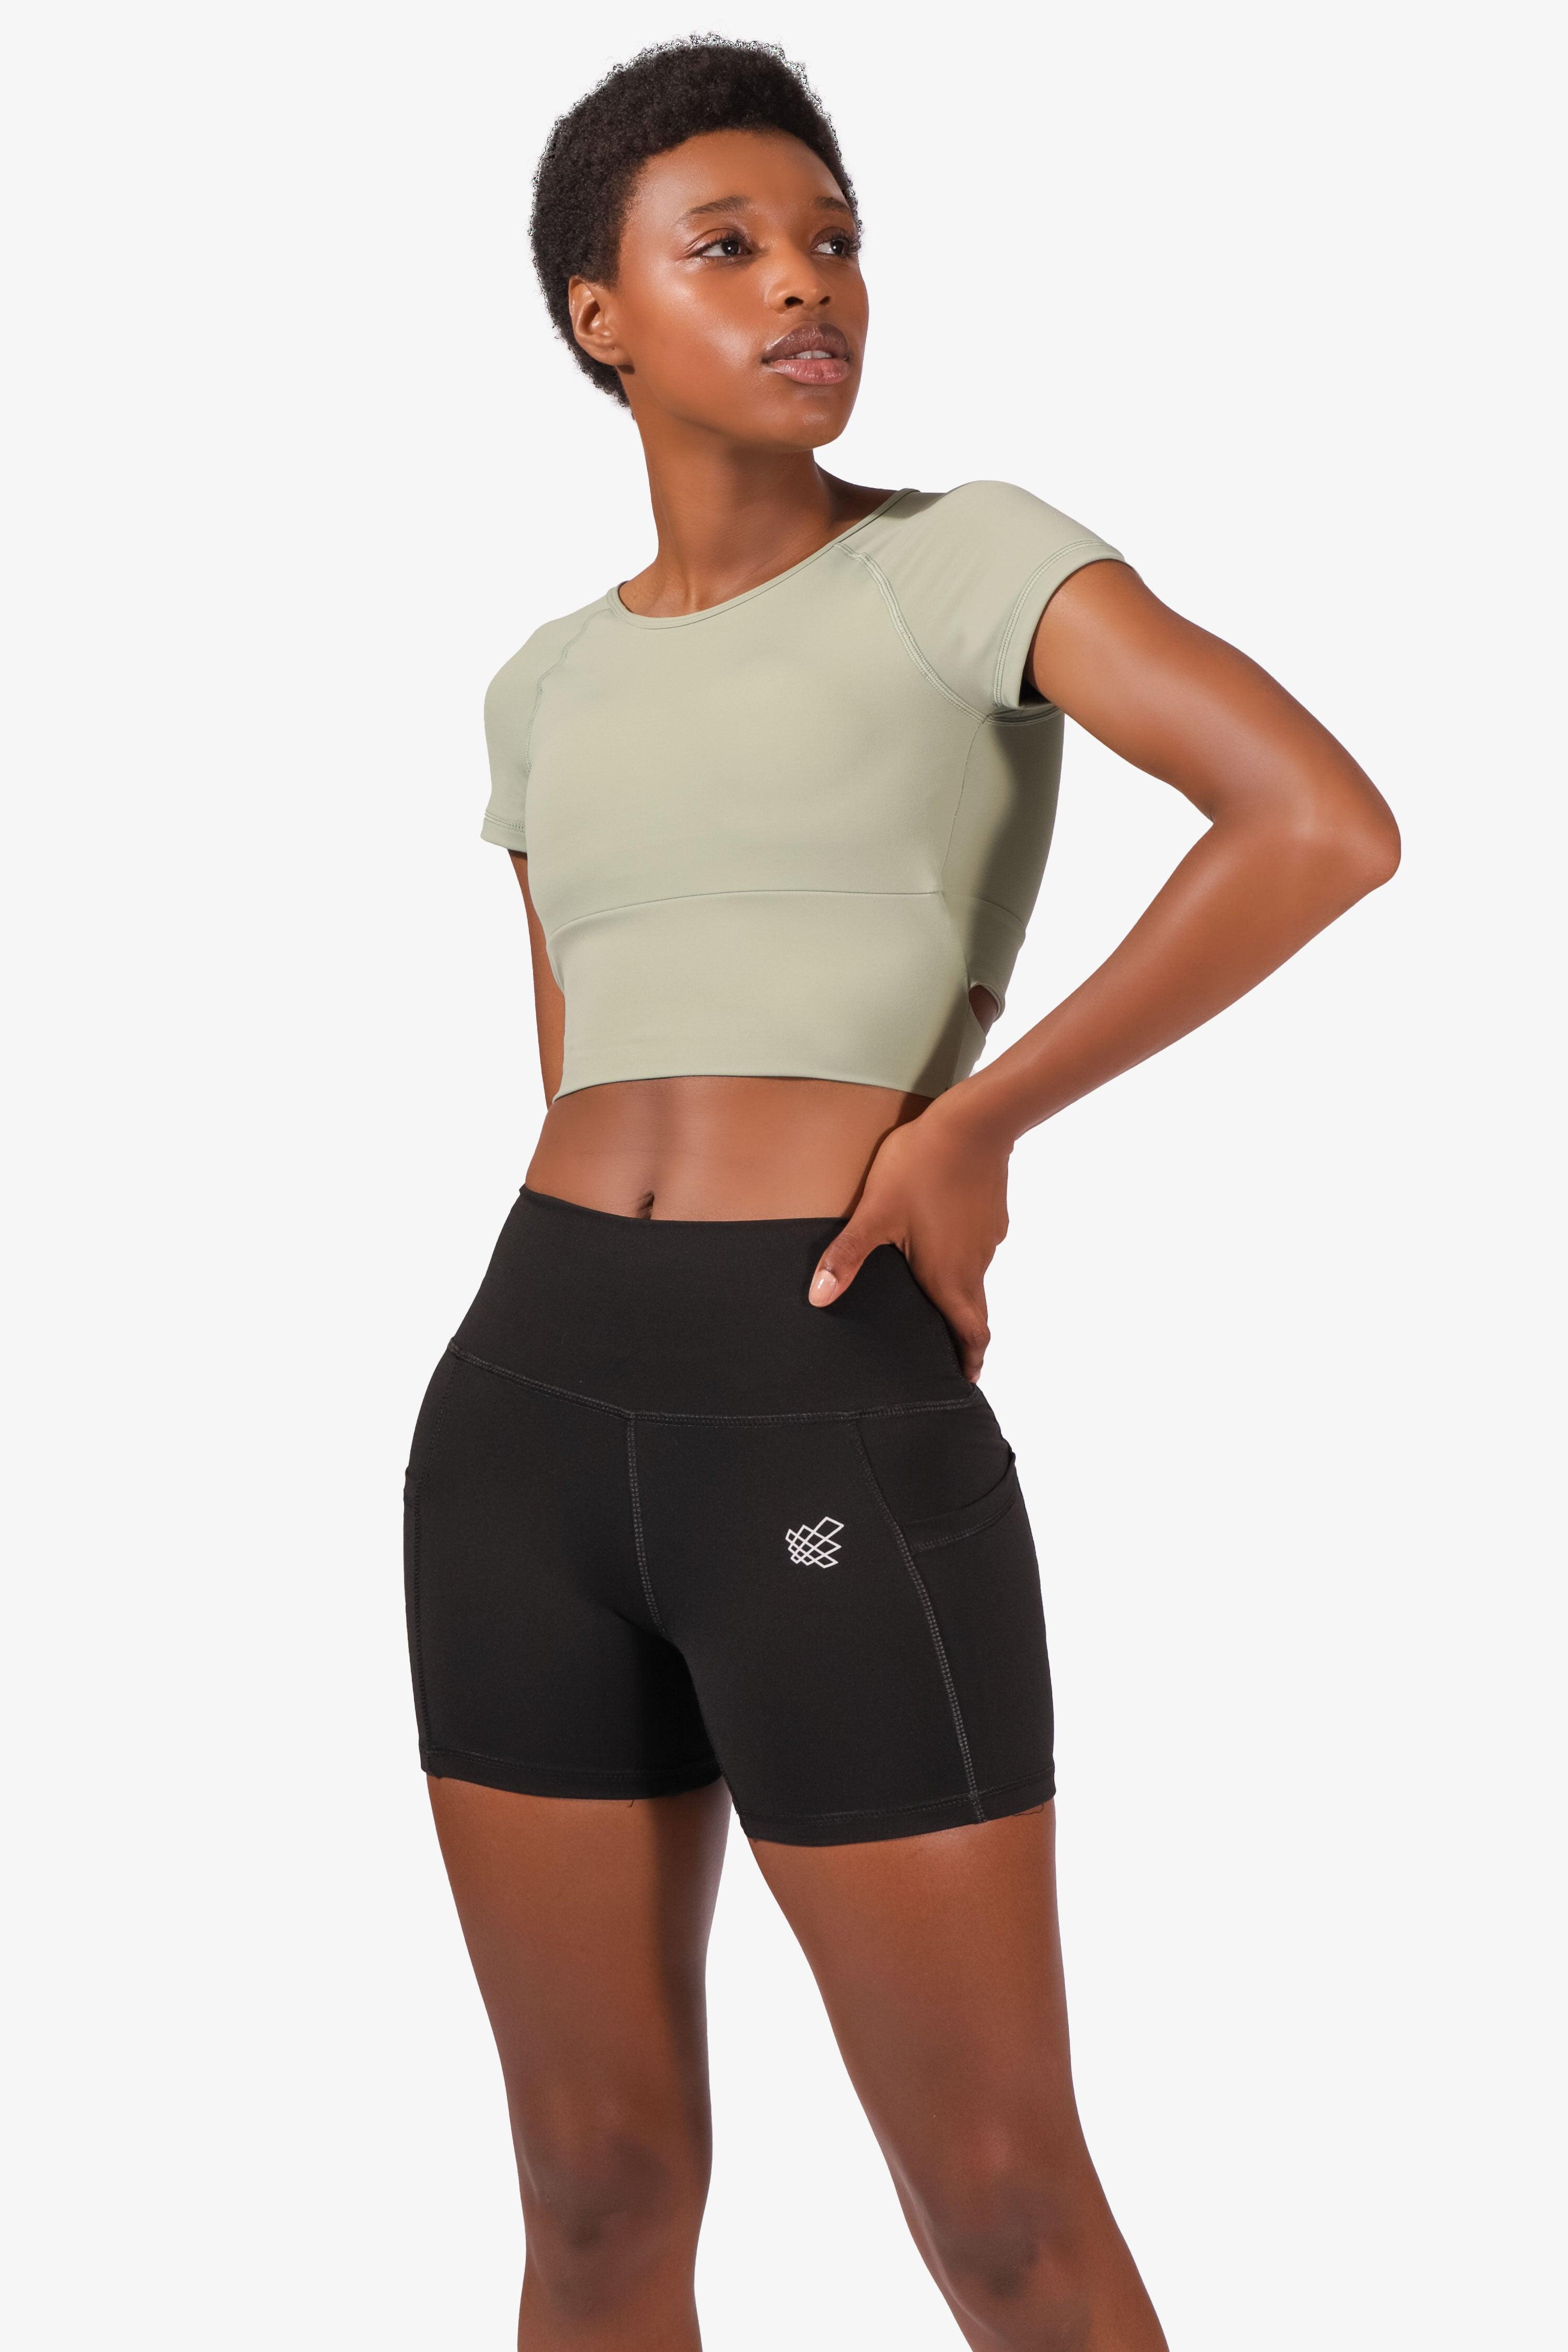 Women's Workout Crop Tops Yoga Tight T-Shirts Square Neck with Pad Bra  Light Compression Tee Cream Feeling Short Sleeves